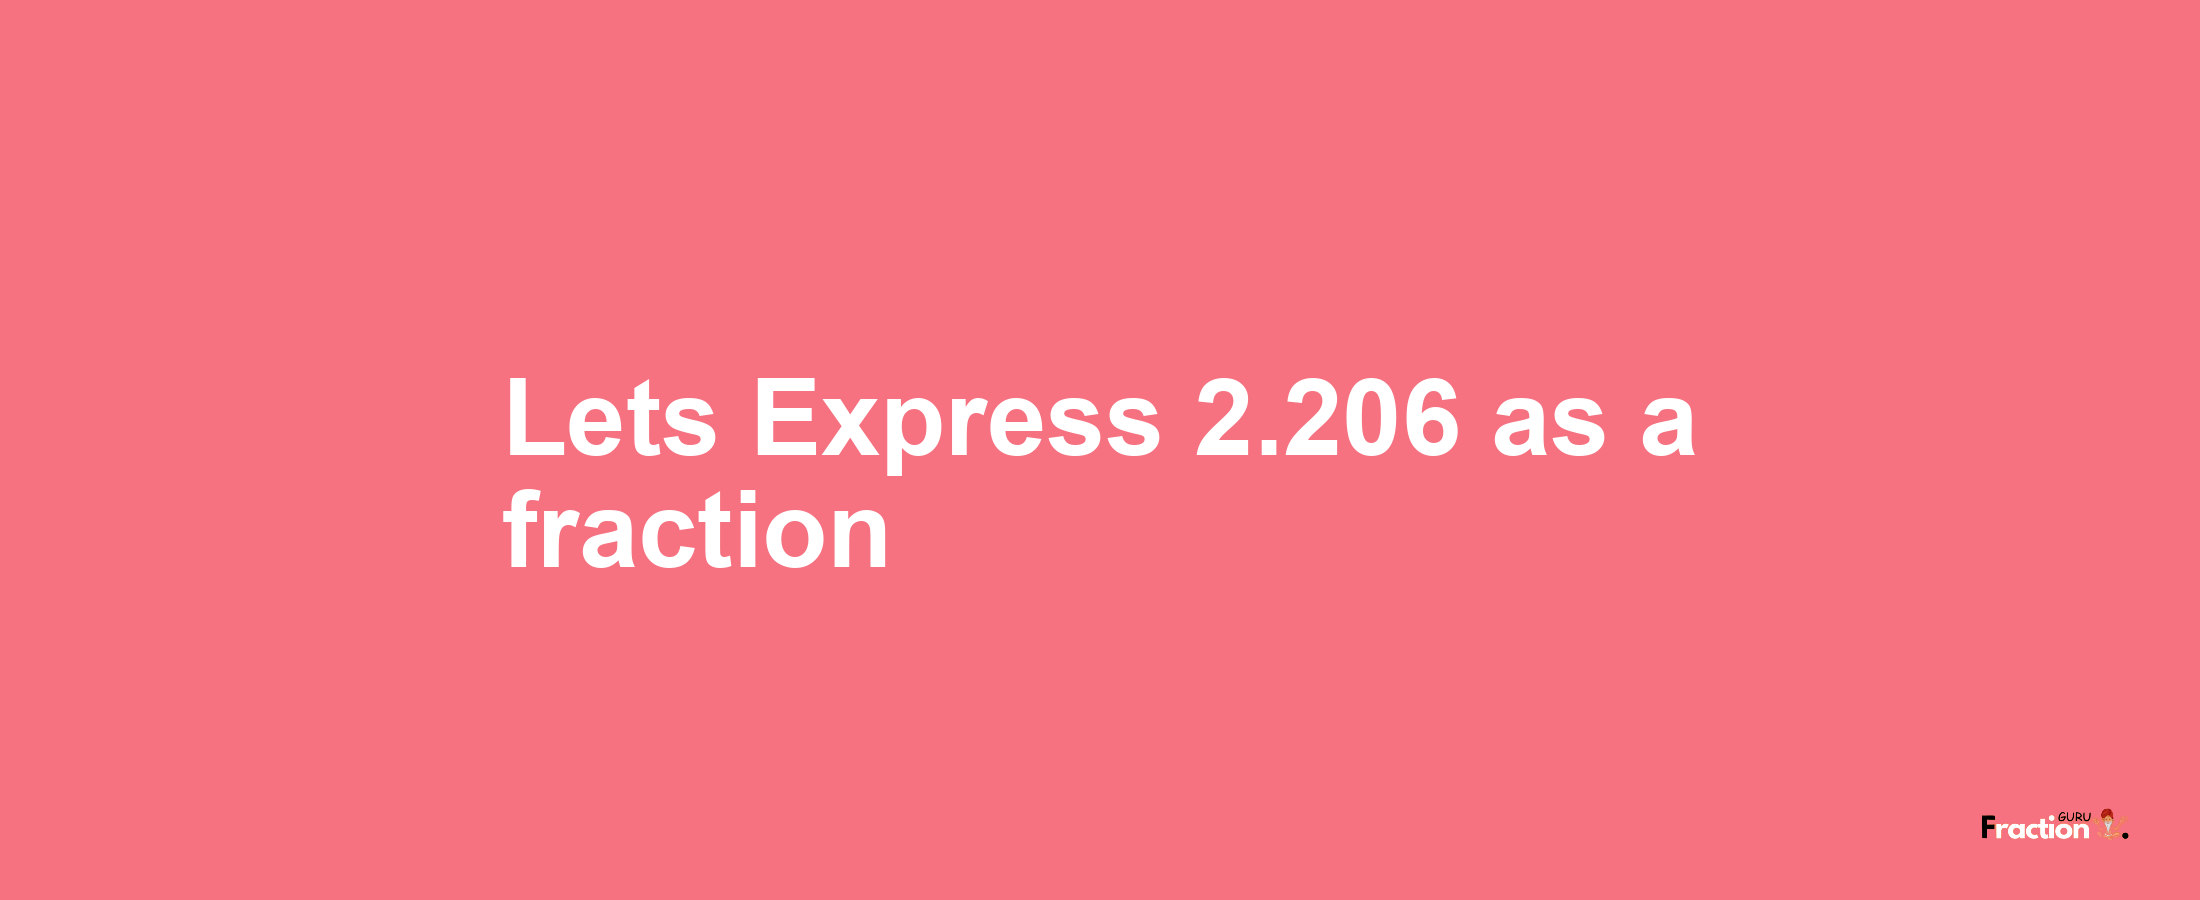 Lets Express 2.206 as afraction